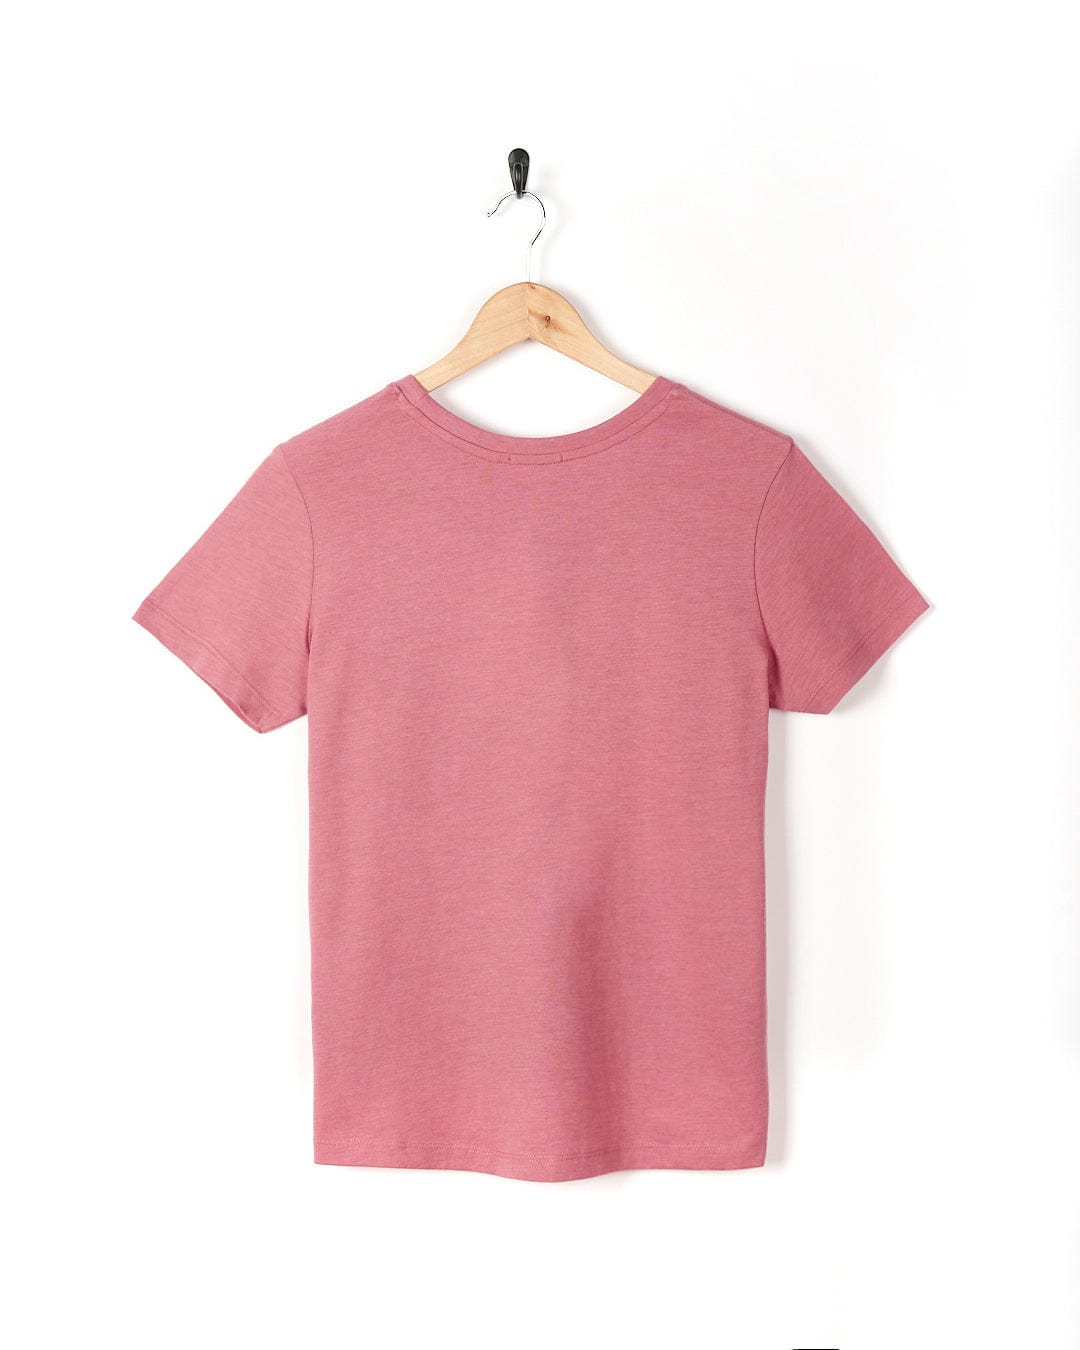 A Love Your Ocean - Womens Short Sleeve T-Shirt - Mid Pink hanging on a wooden hanger. (Brand Name: Saltrock)